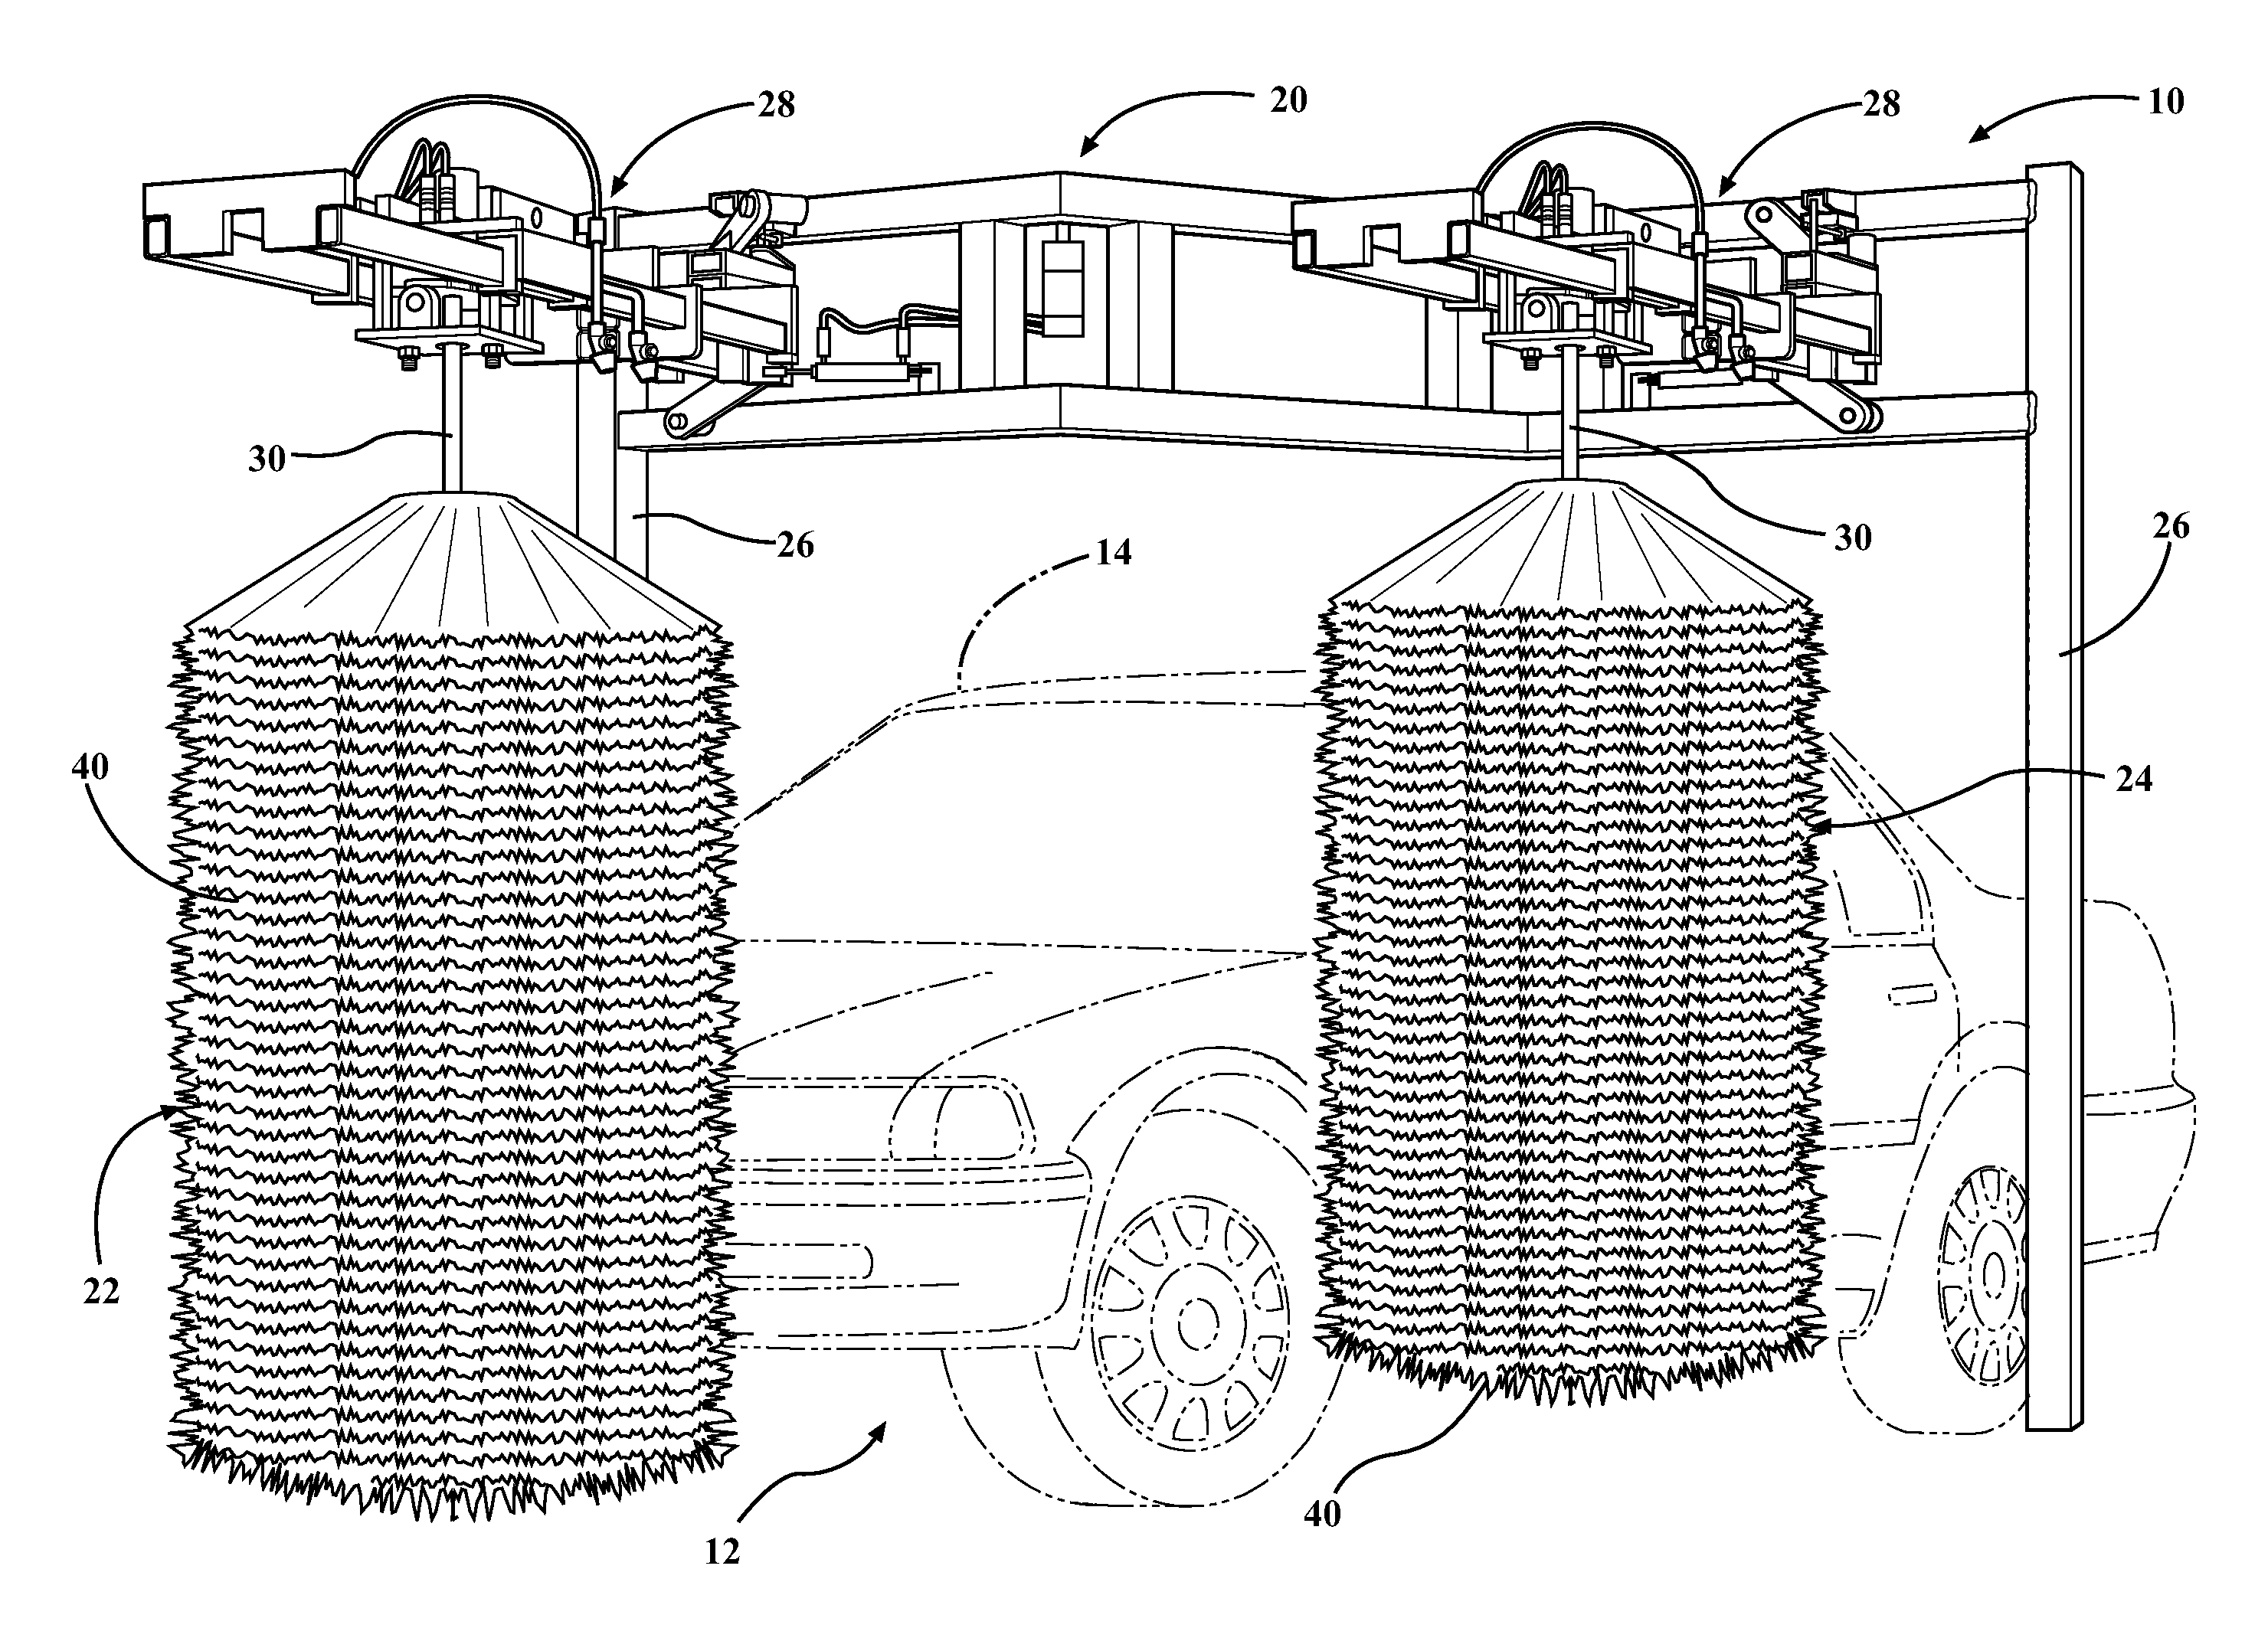 Absorbent media element for a vehicle wash component